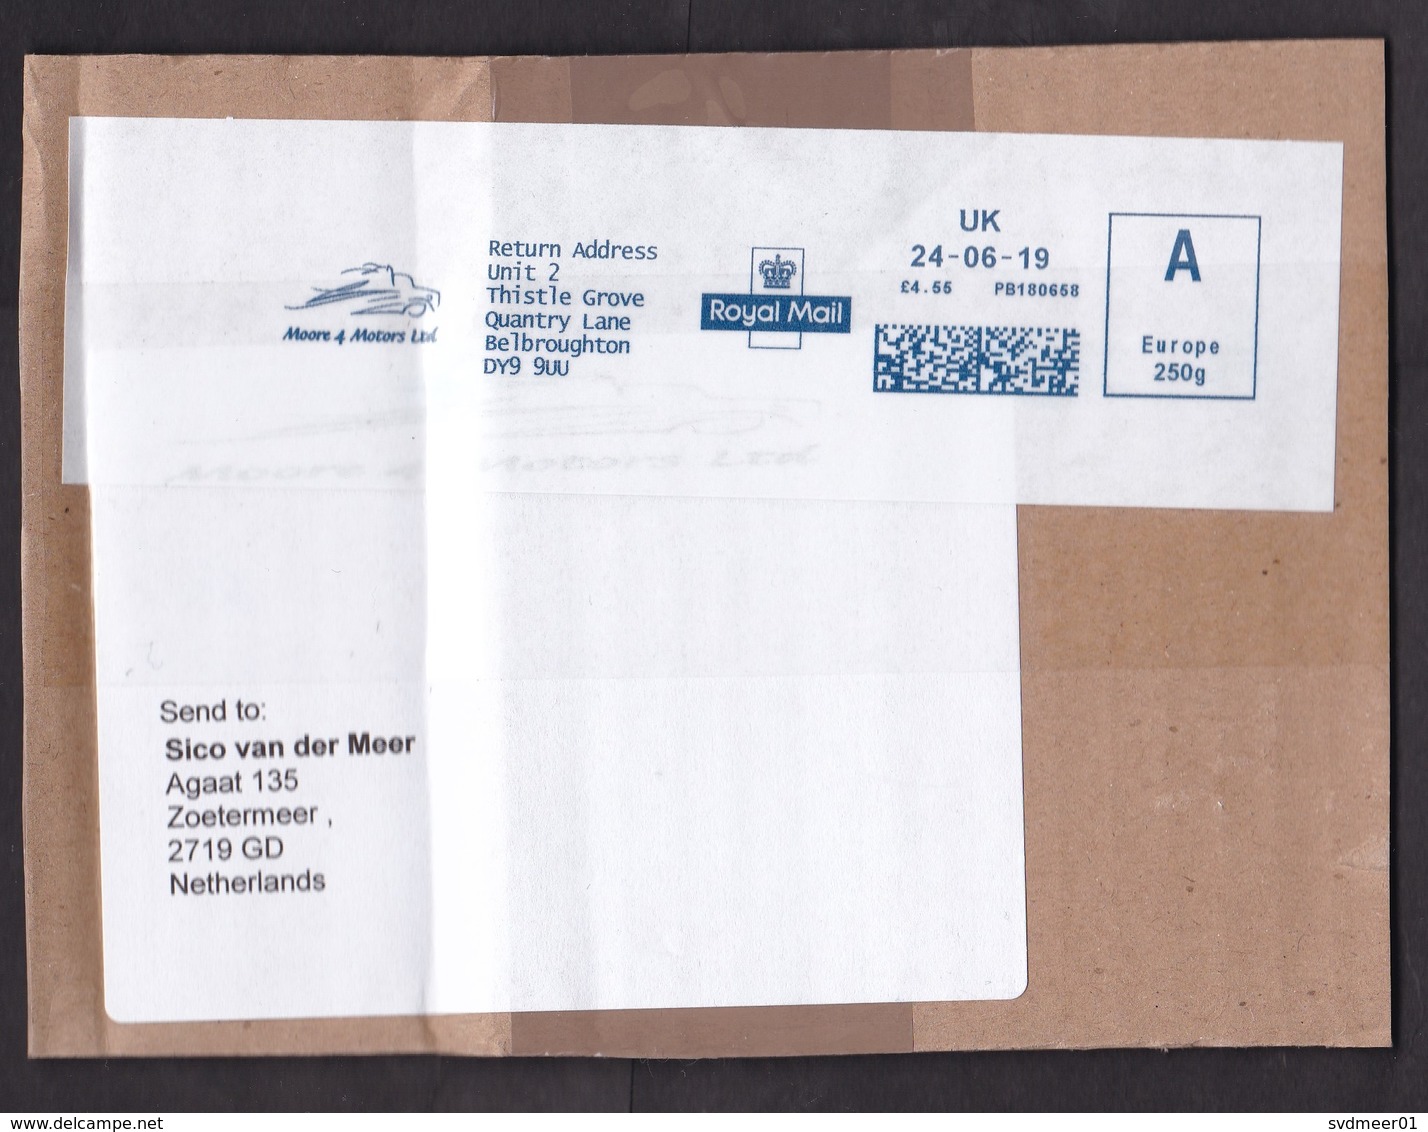 UK: Parcel Fragment (cut-out) To Netherlands, 2019, Meter Cancel, Moore 4 Motors Car Parts, Automobile (tape & Crease) - Lettres & Documents